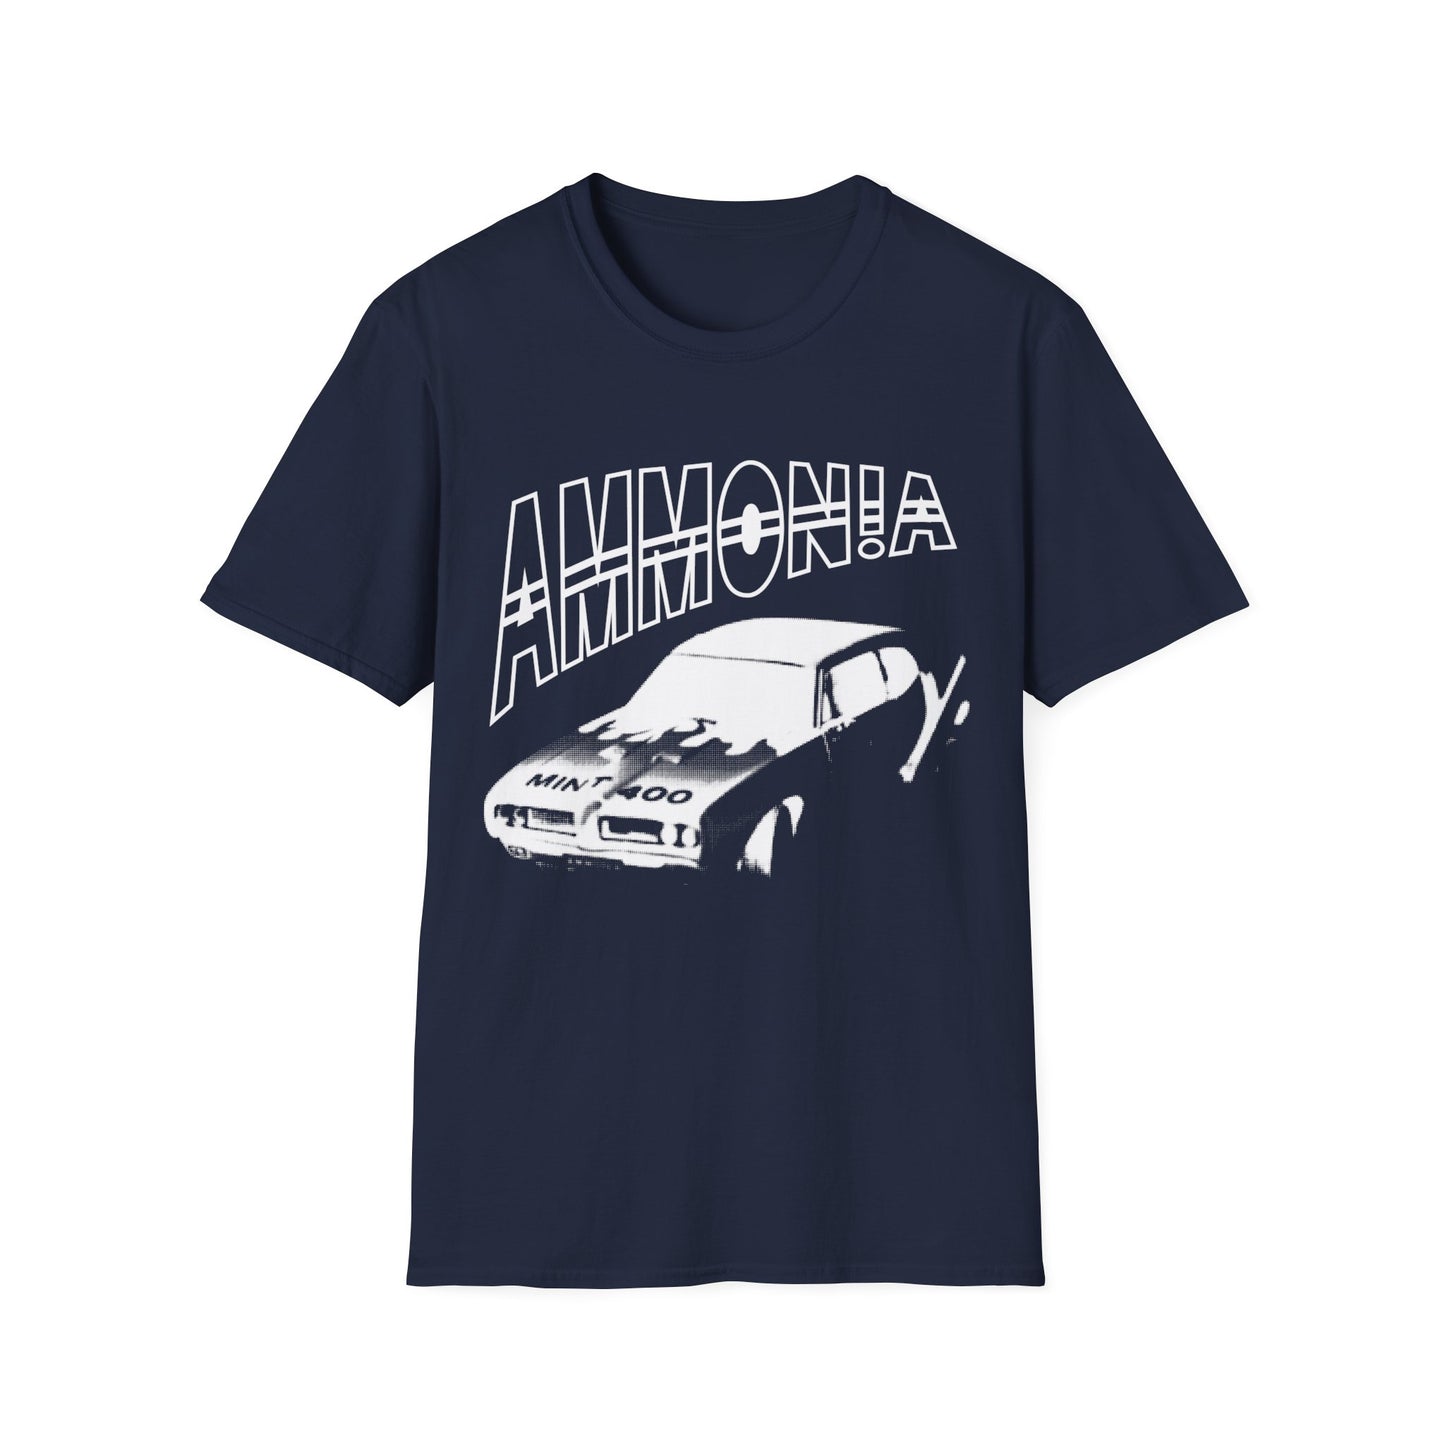 Ammonia Mint 400 - Special Edition T-Shirt